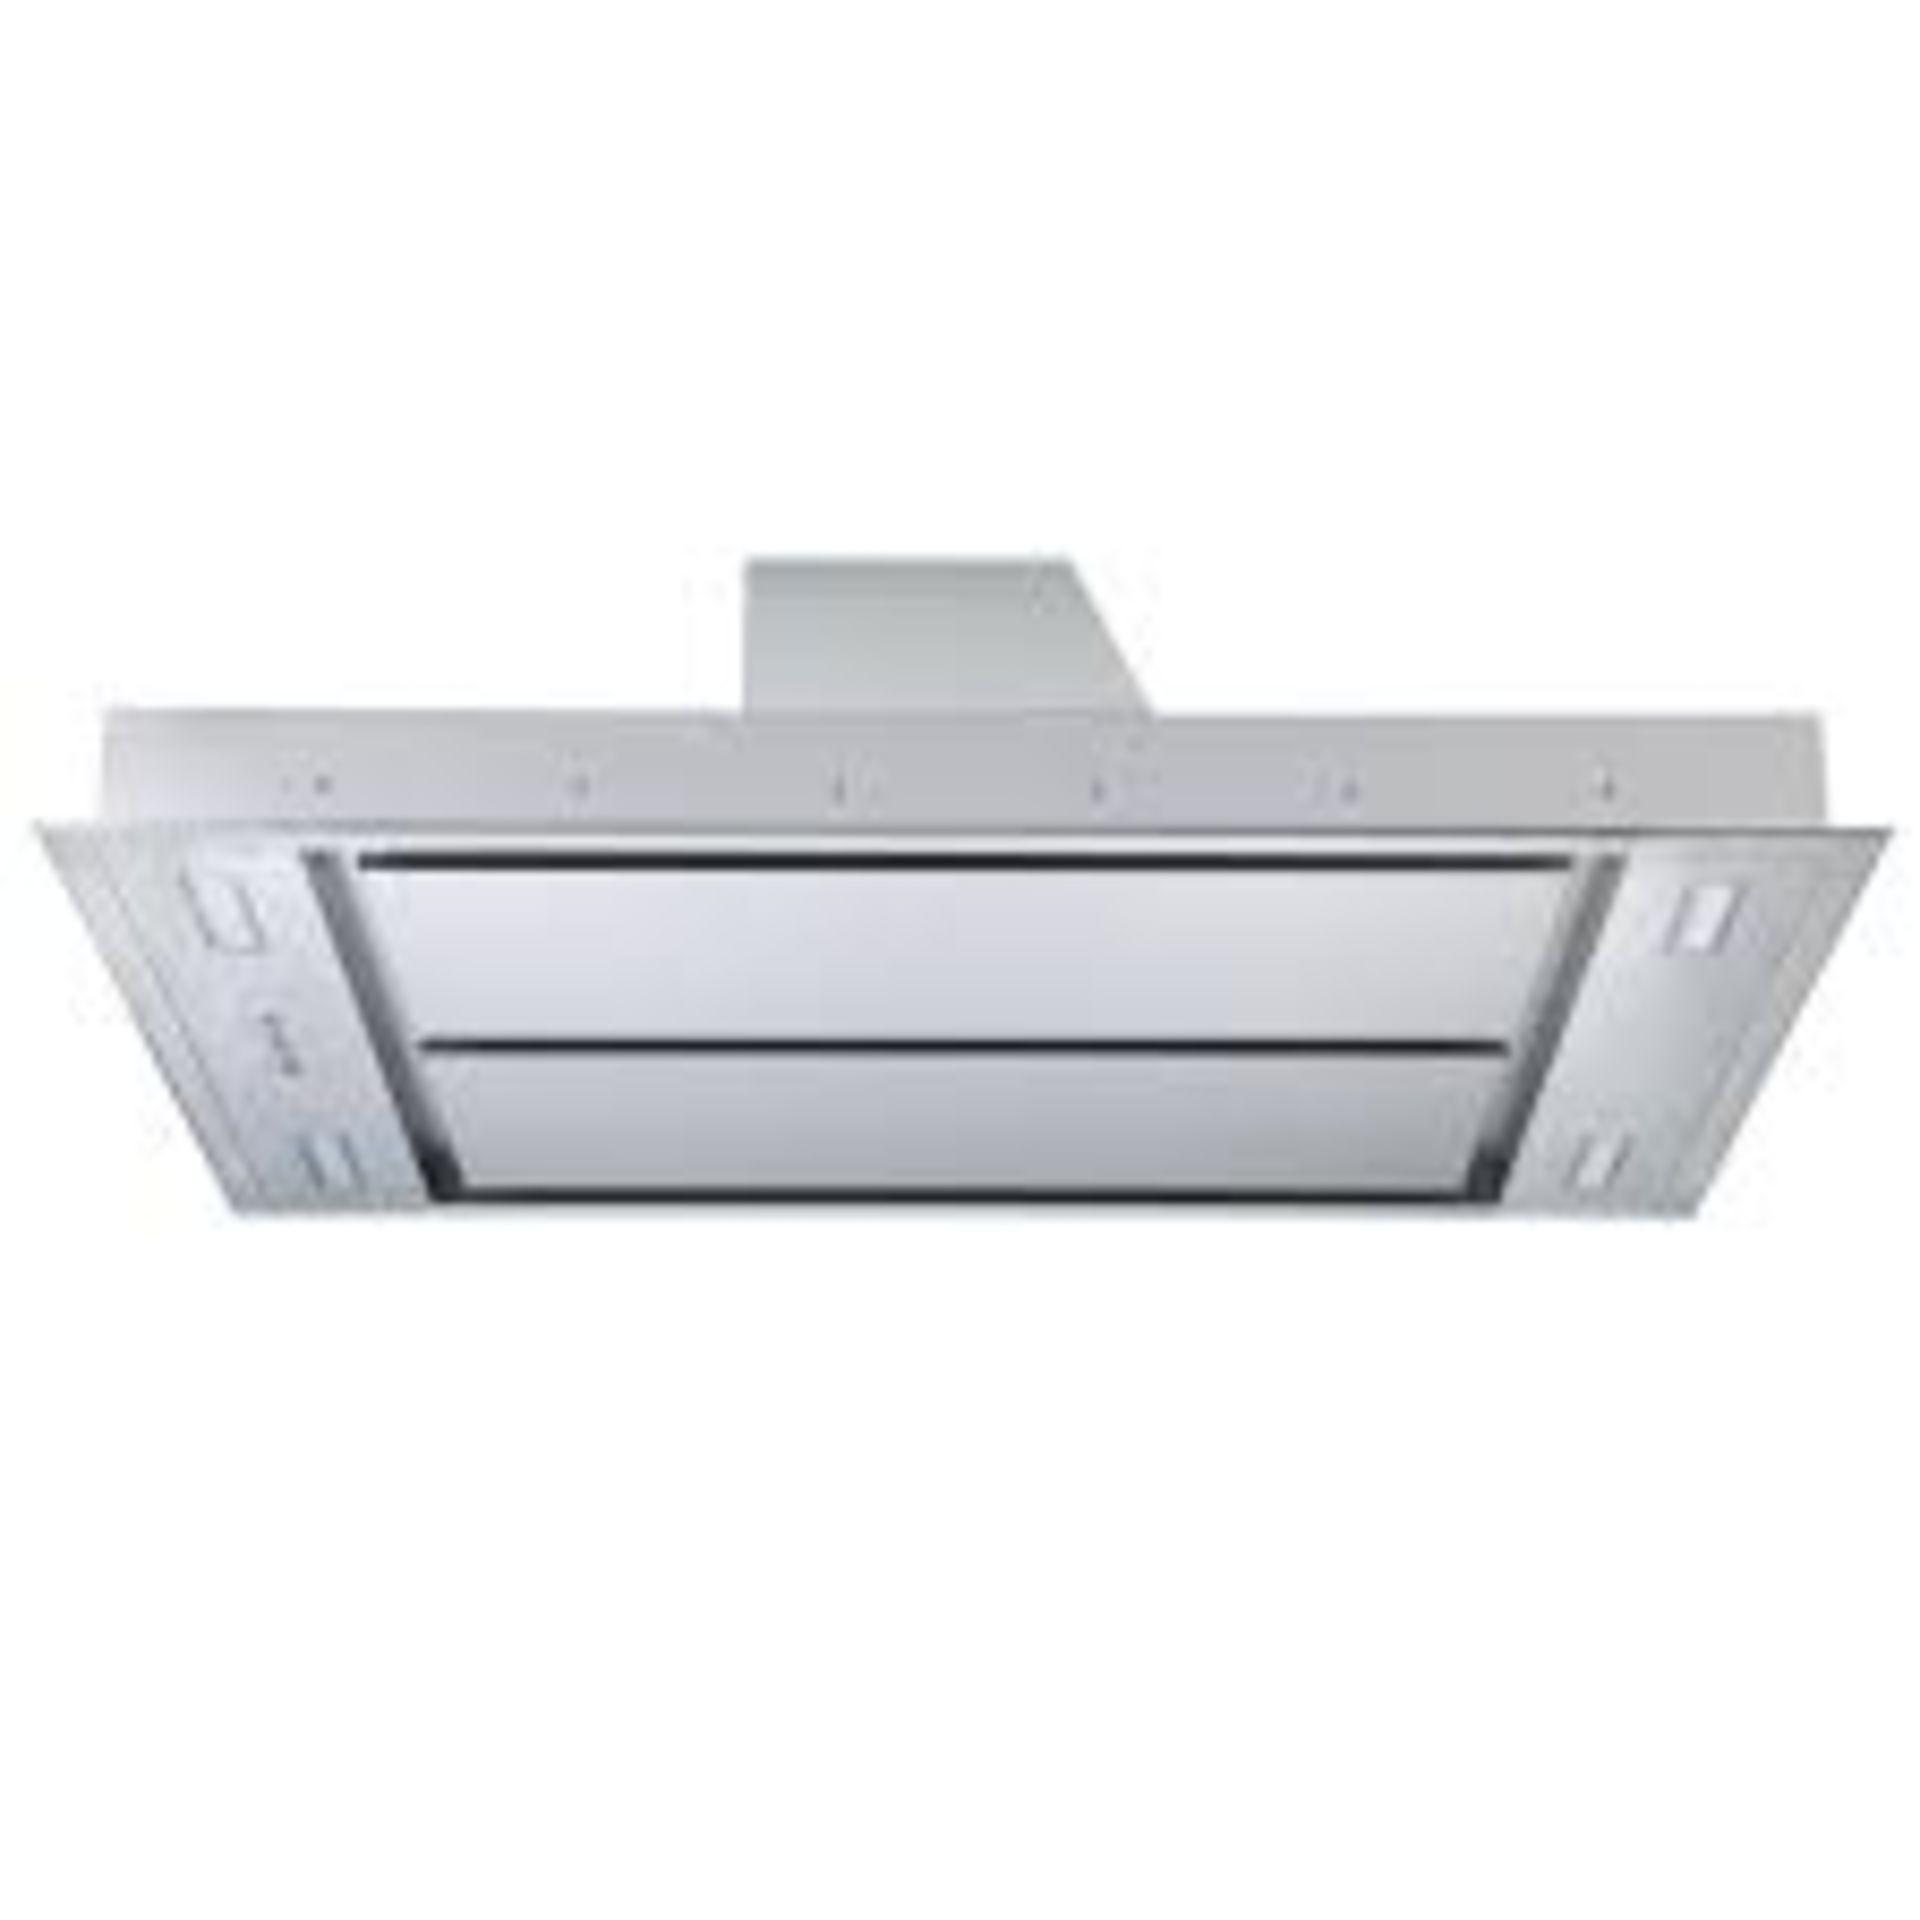 Boxed UBADCCH110 110cm Ceiling Cooker Hood In Black RRP £600 (Pictures Are For Illustration Purposes